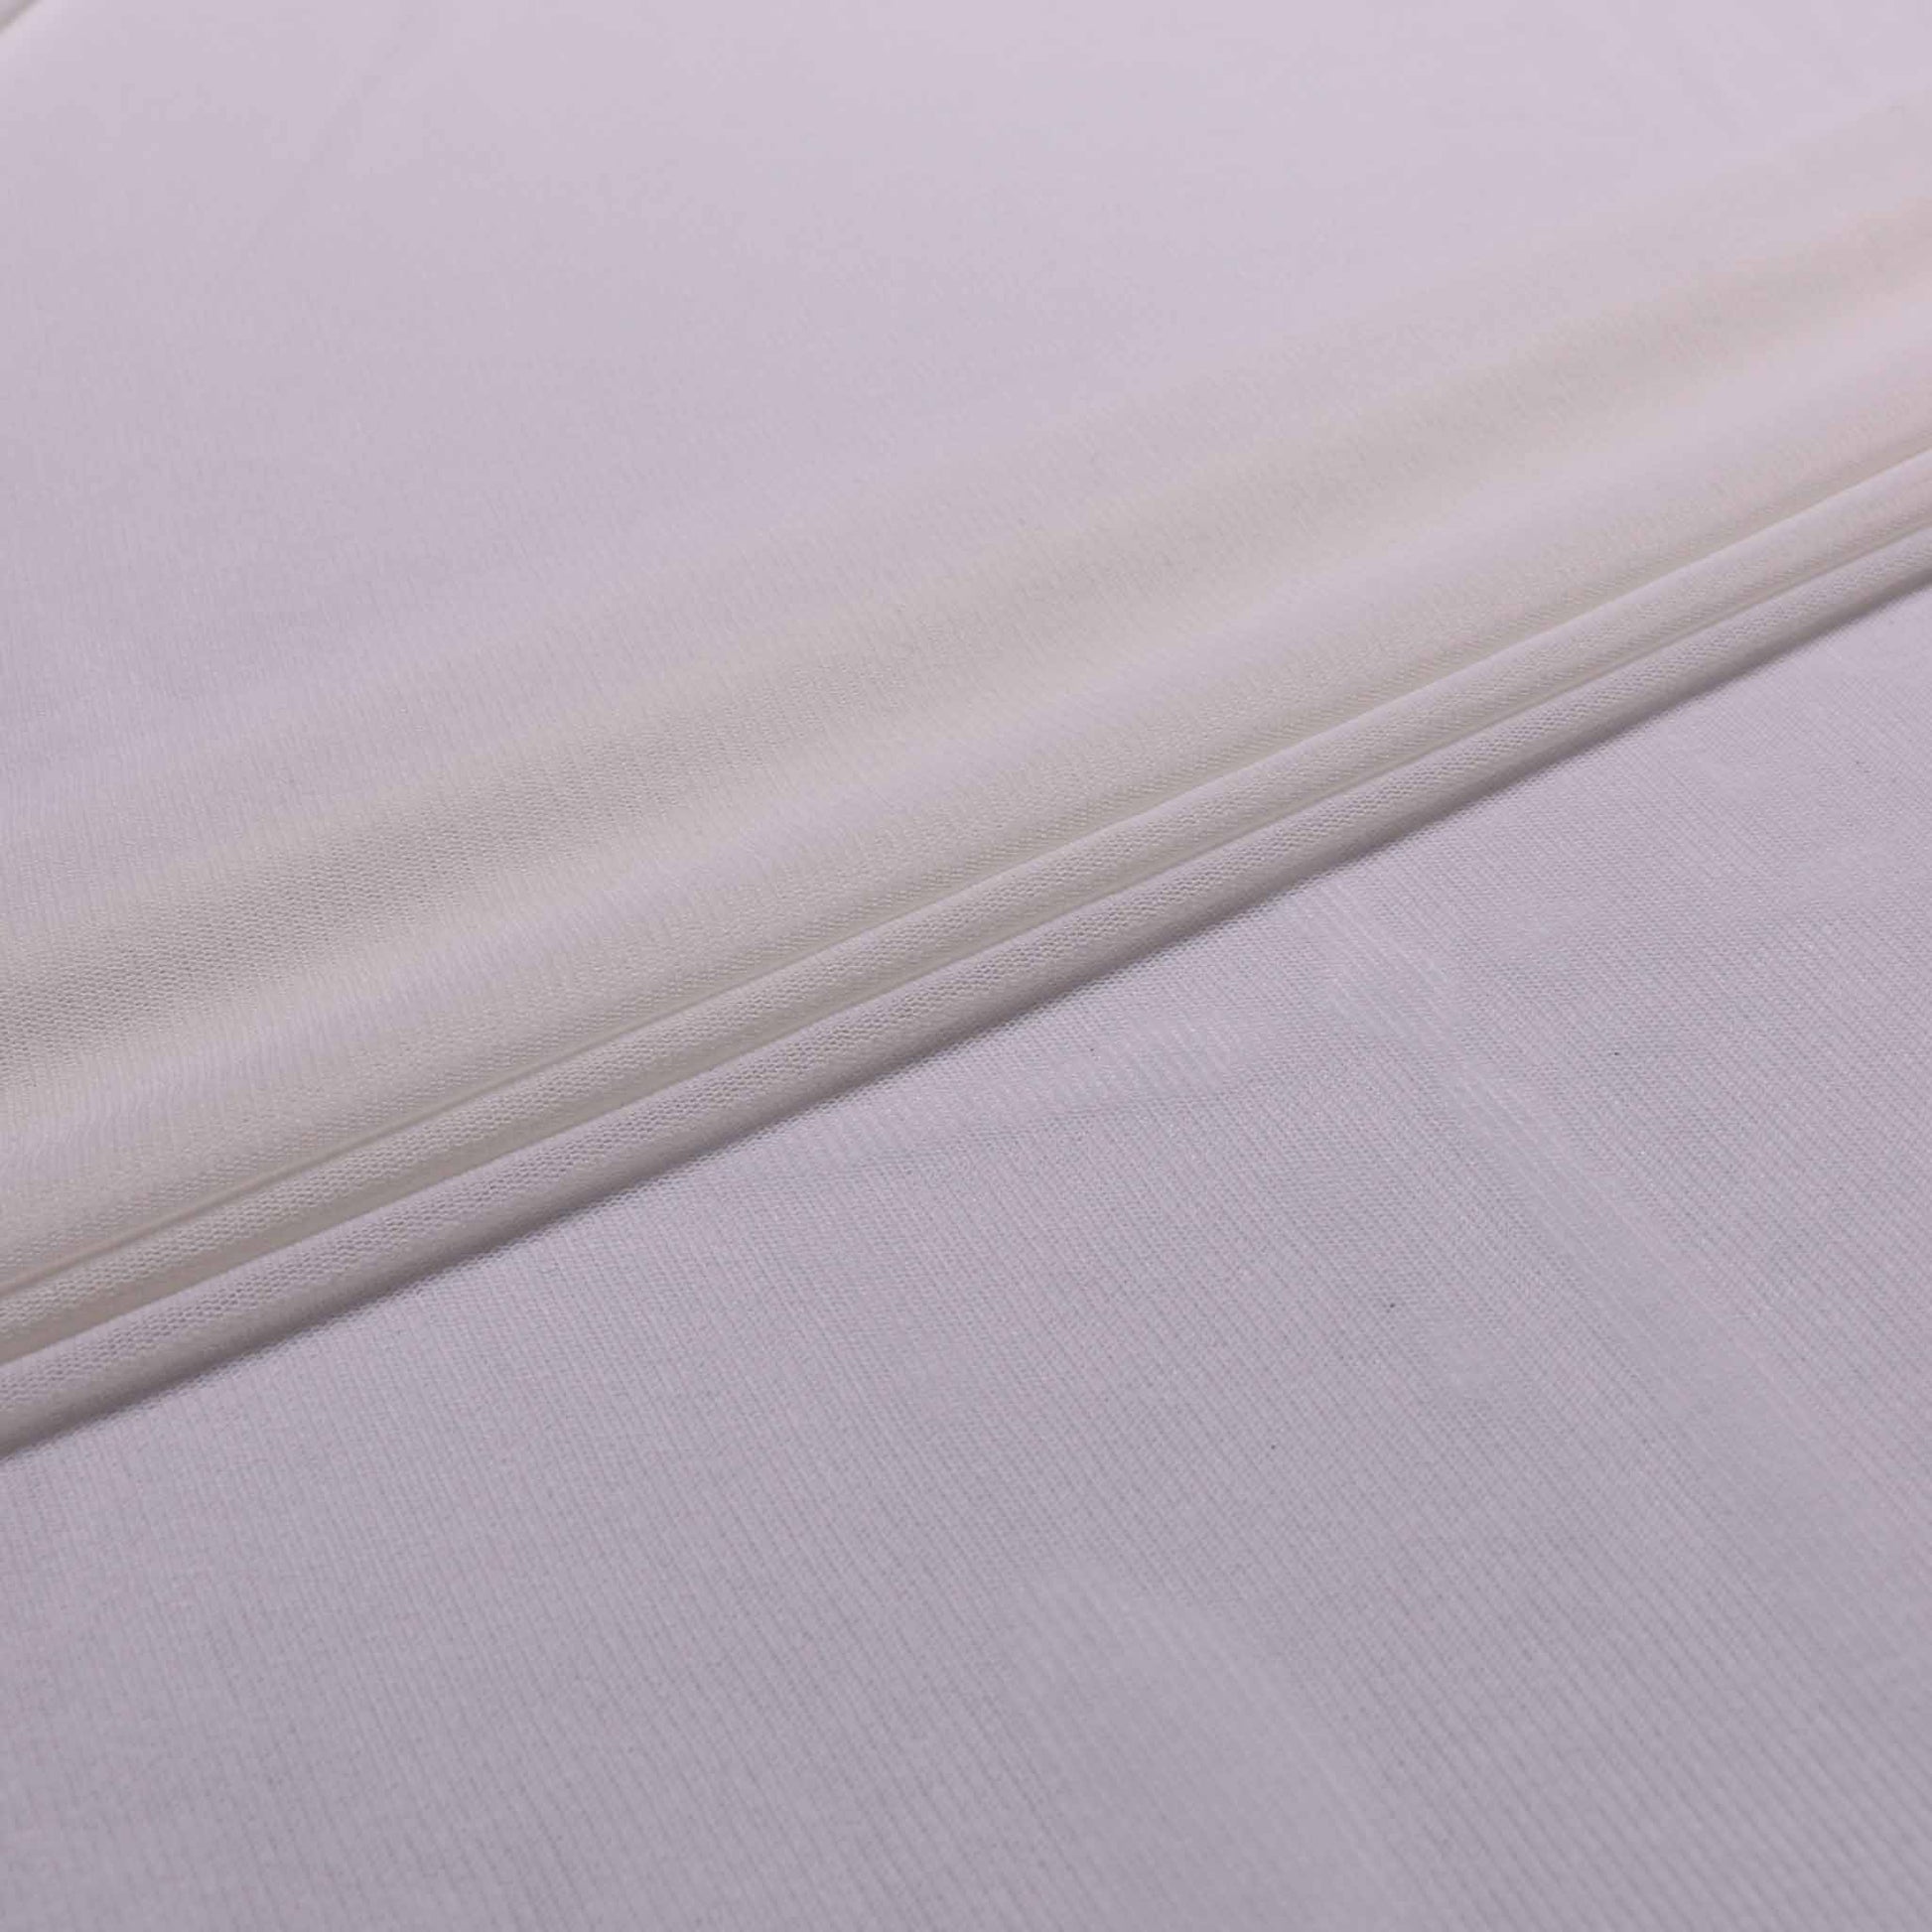 dressmaking netting fabric with stretch in white